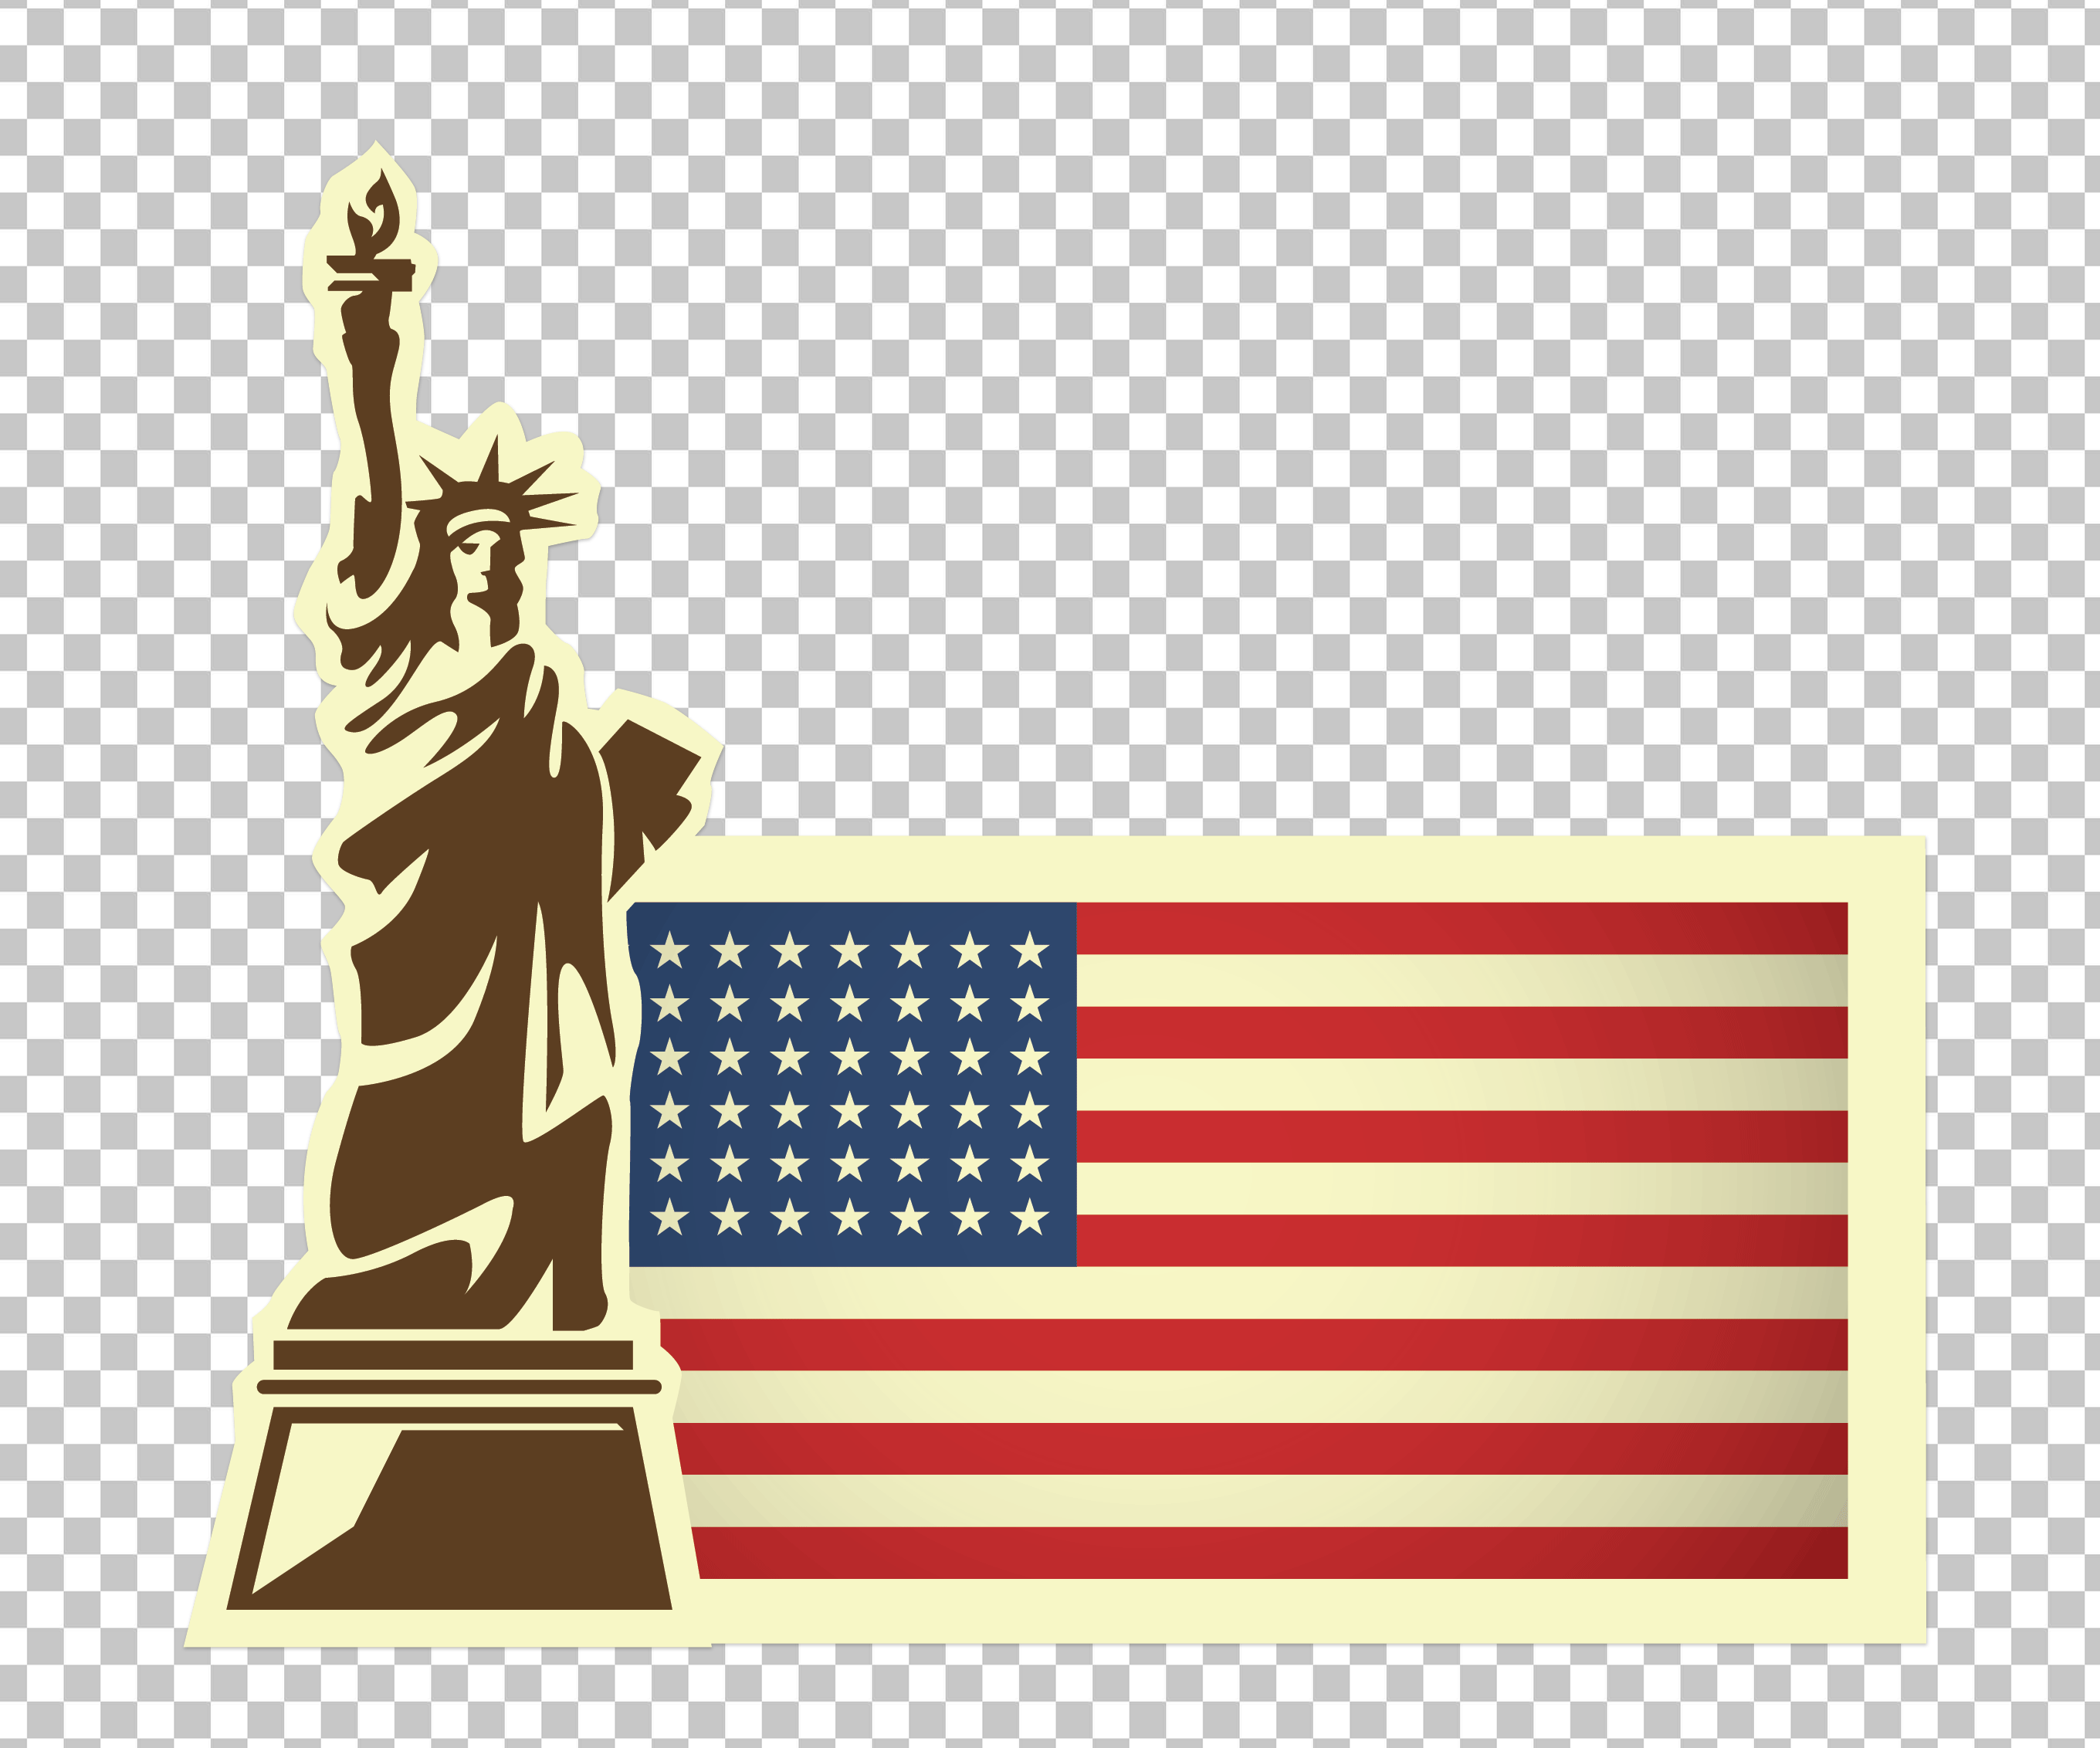 Statue of Liberty and American Flag Sticker PNG Image